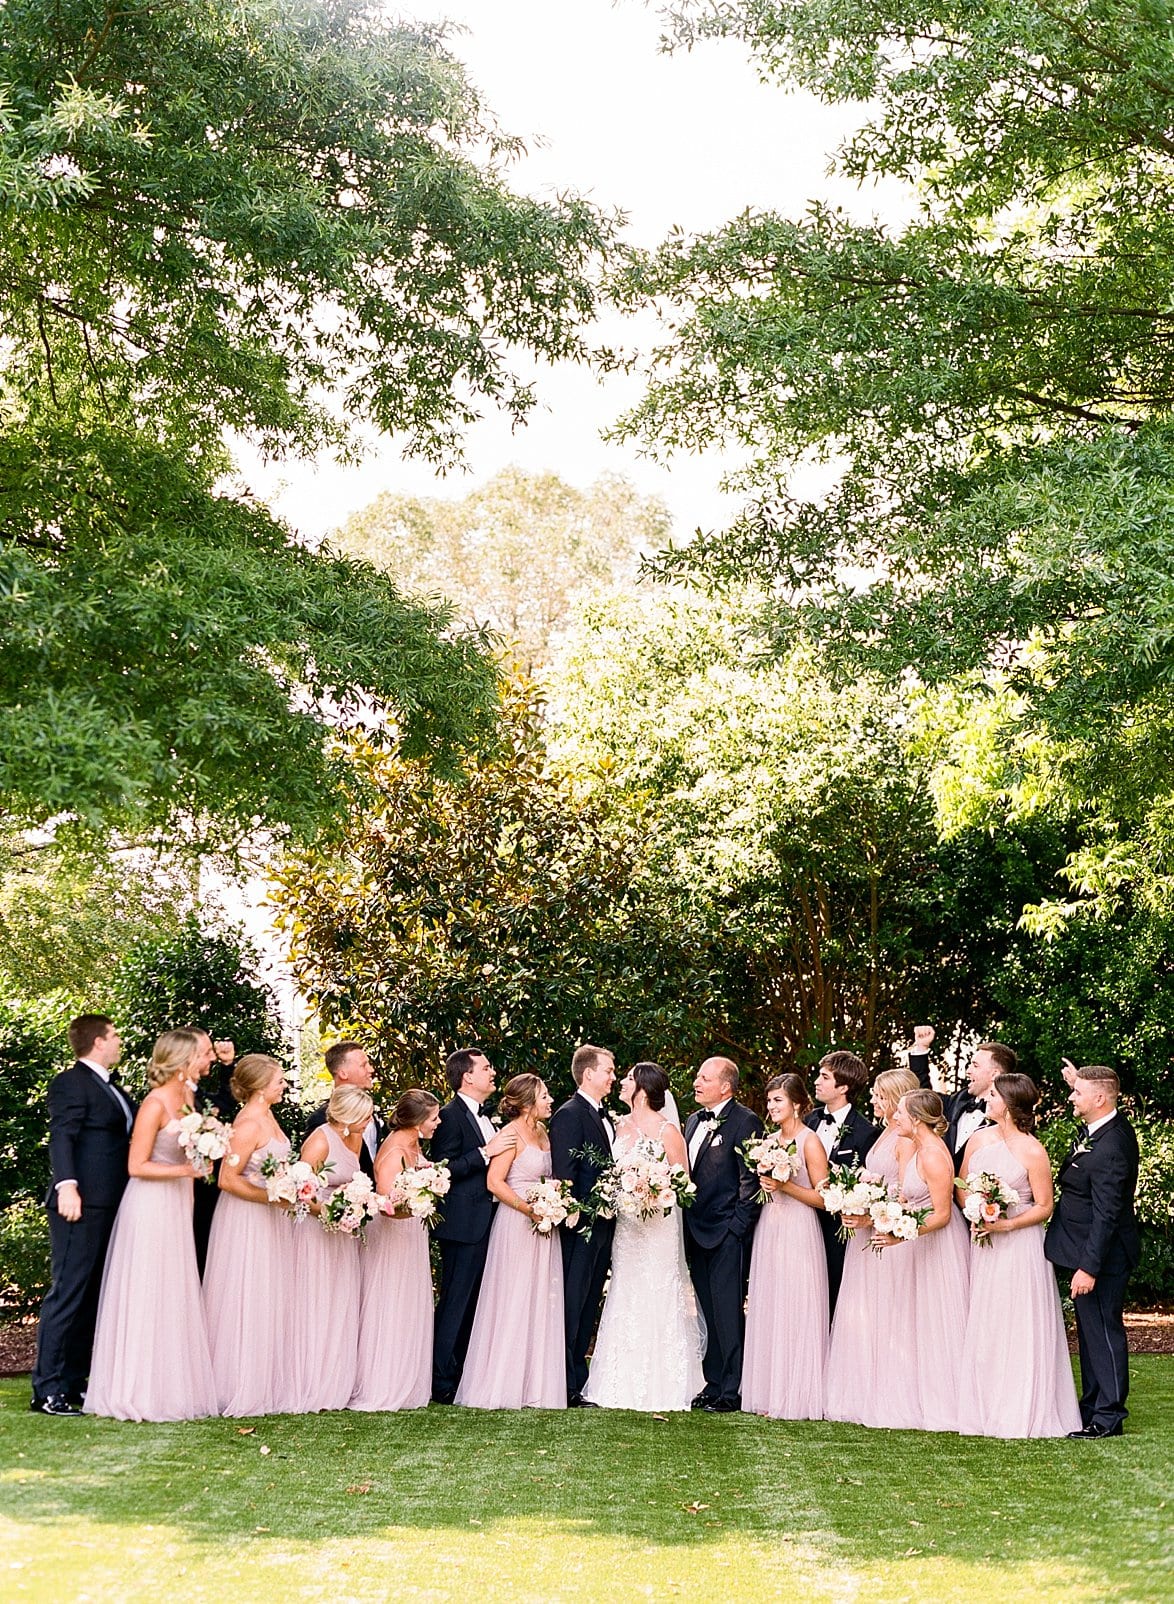 Merrimon Wynne wedding party with bridesmaids and groomsmen photo